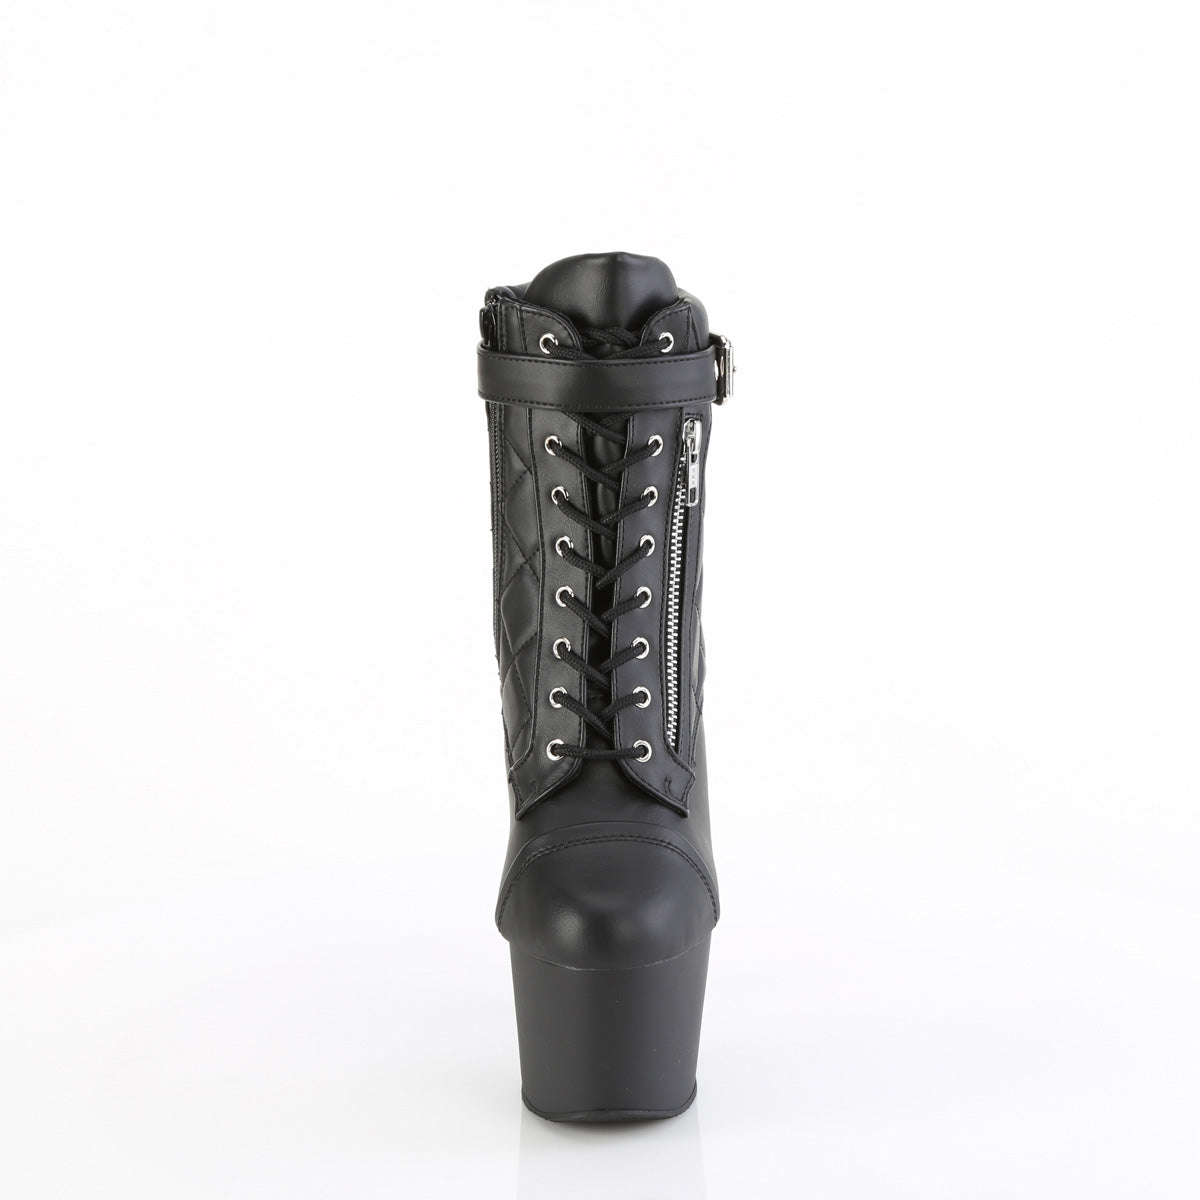 Quilted Pattern Pole Dancing Boots